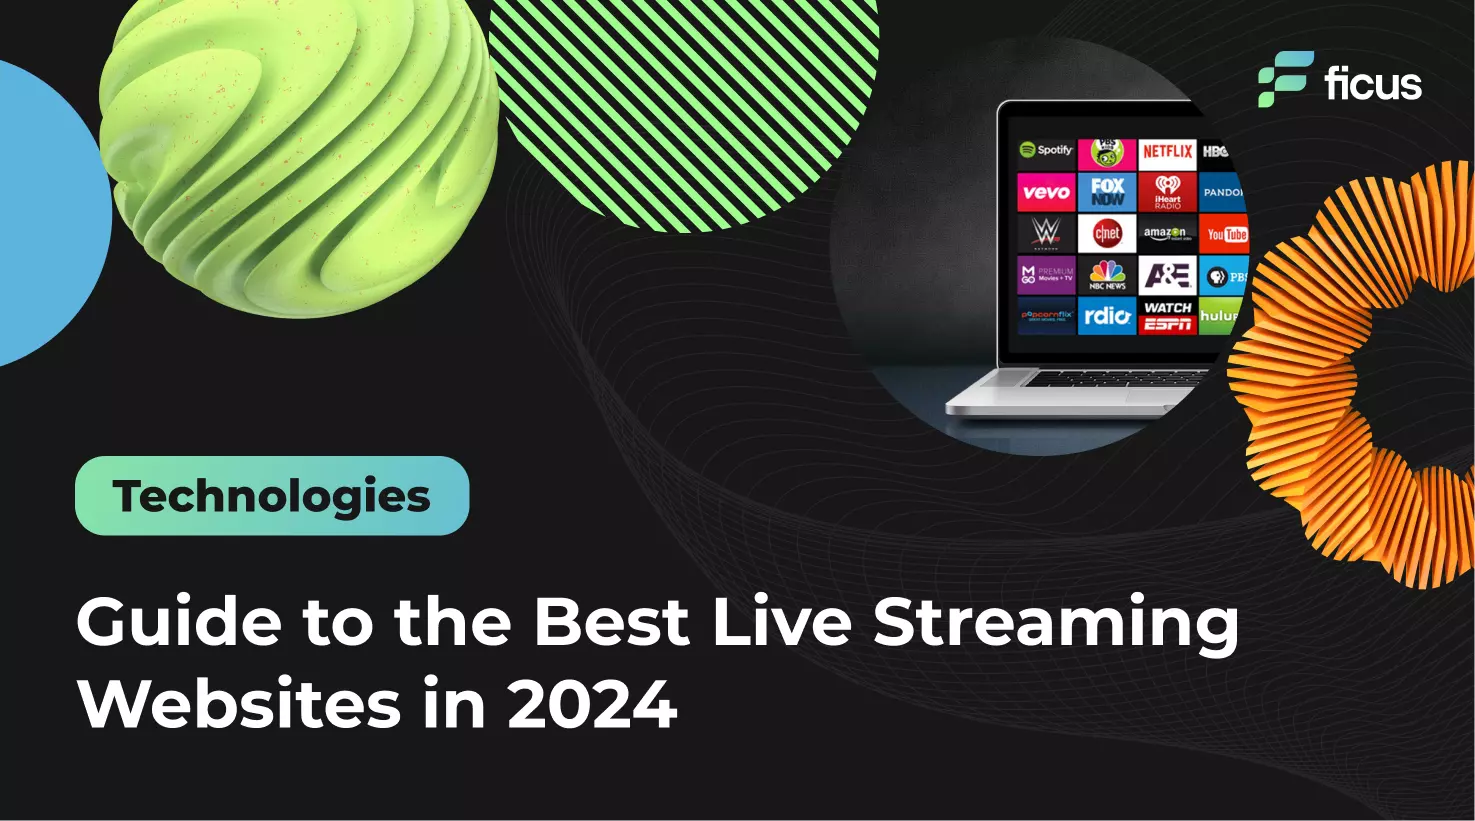 Guide-to-the-Best-Live-Streaming-Websites